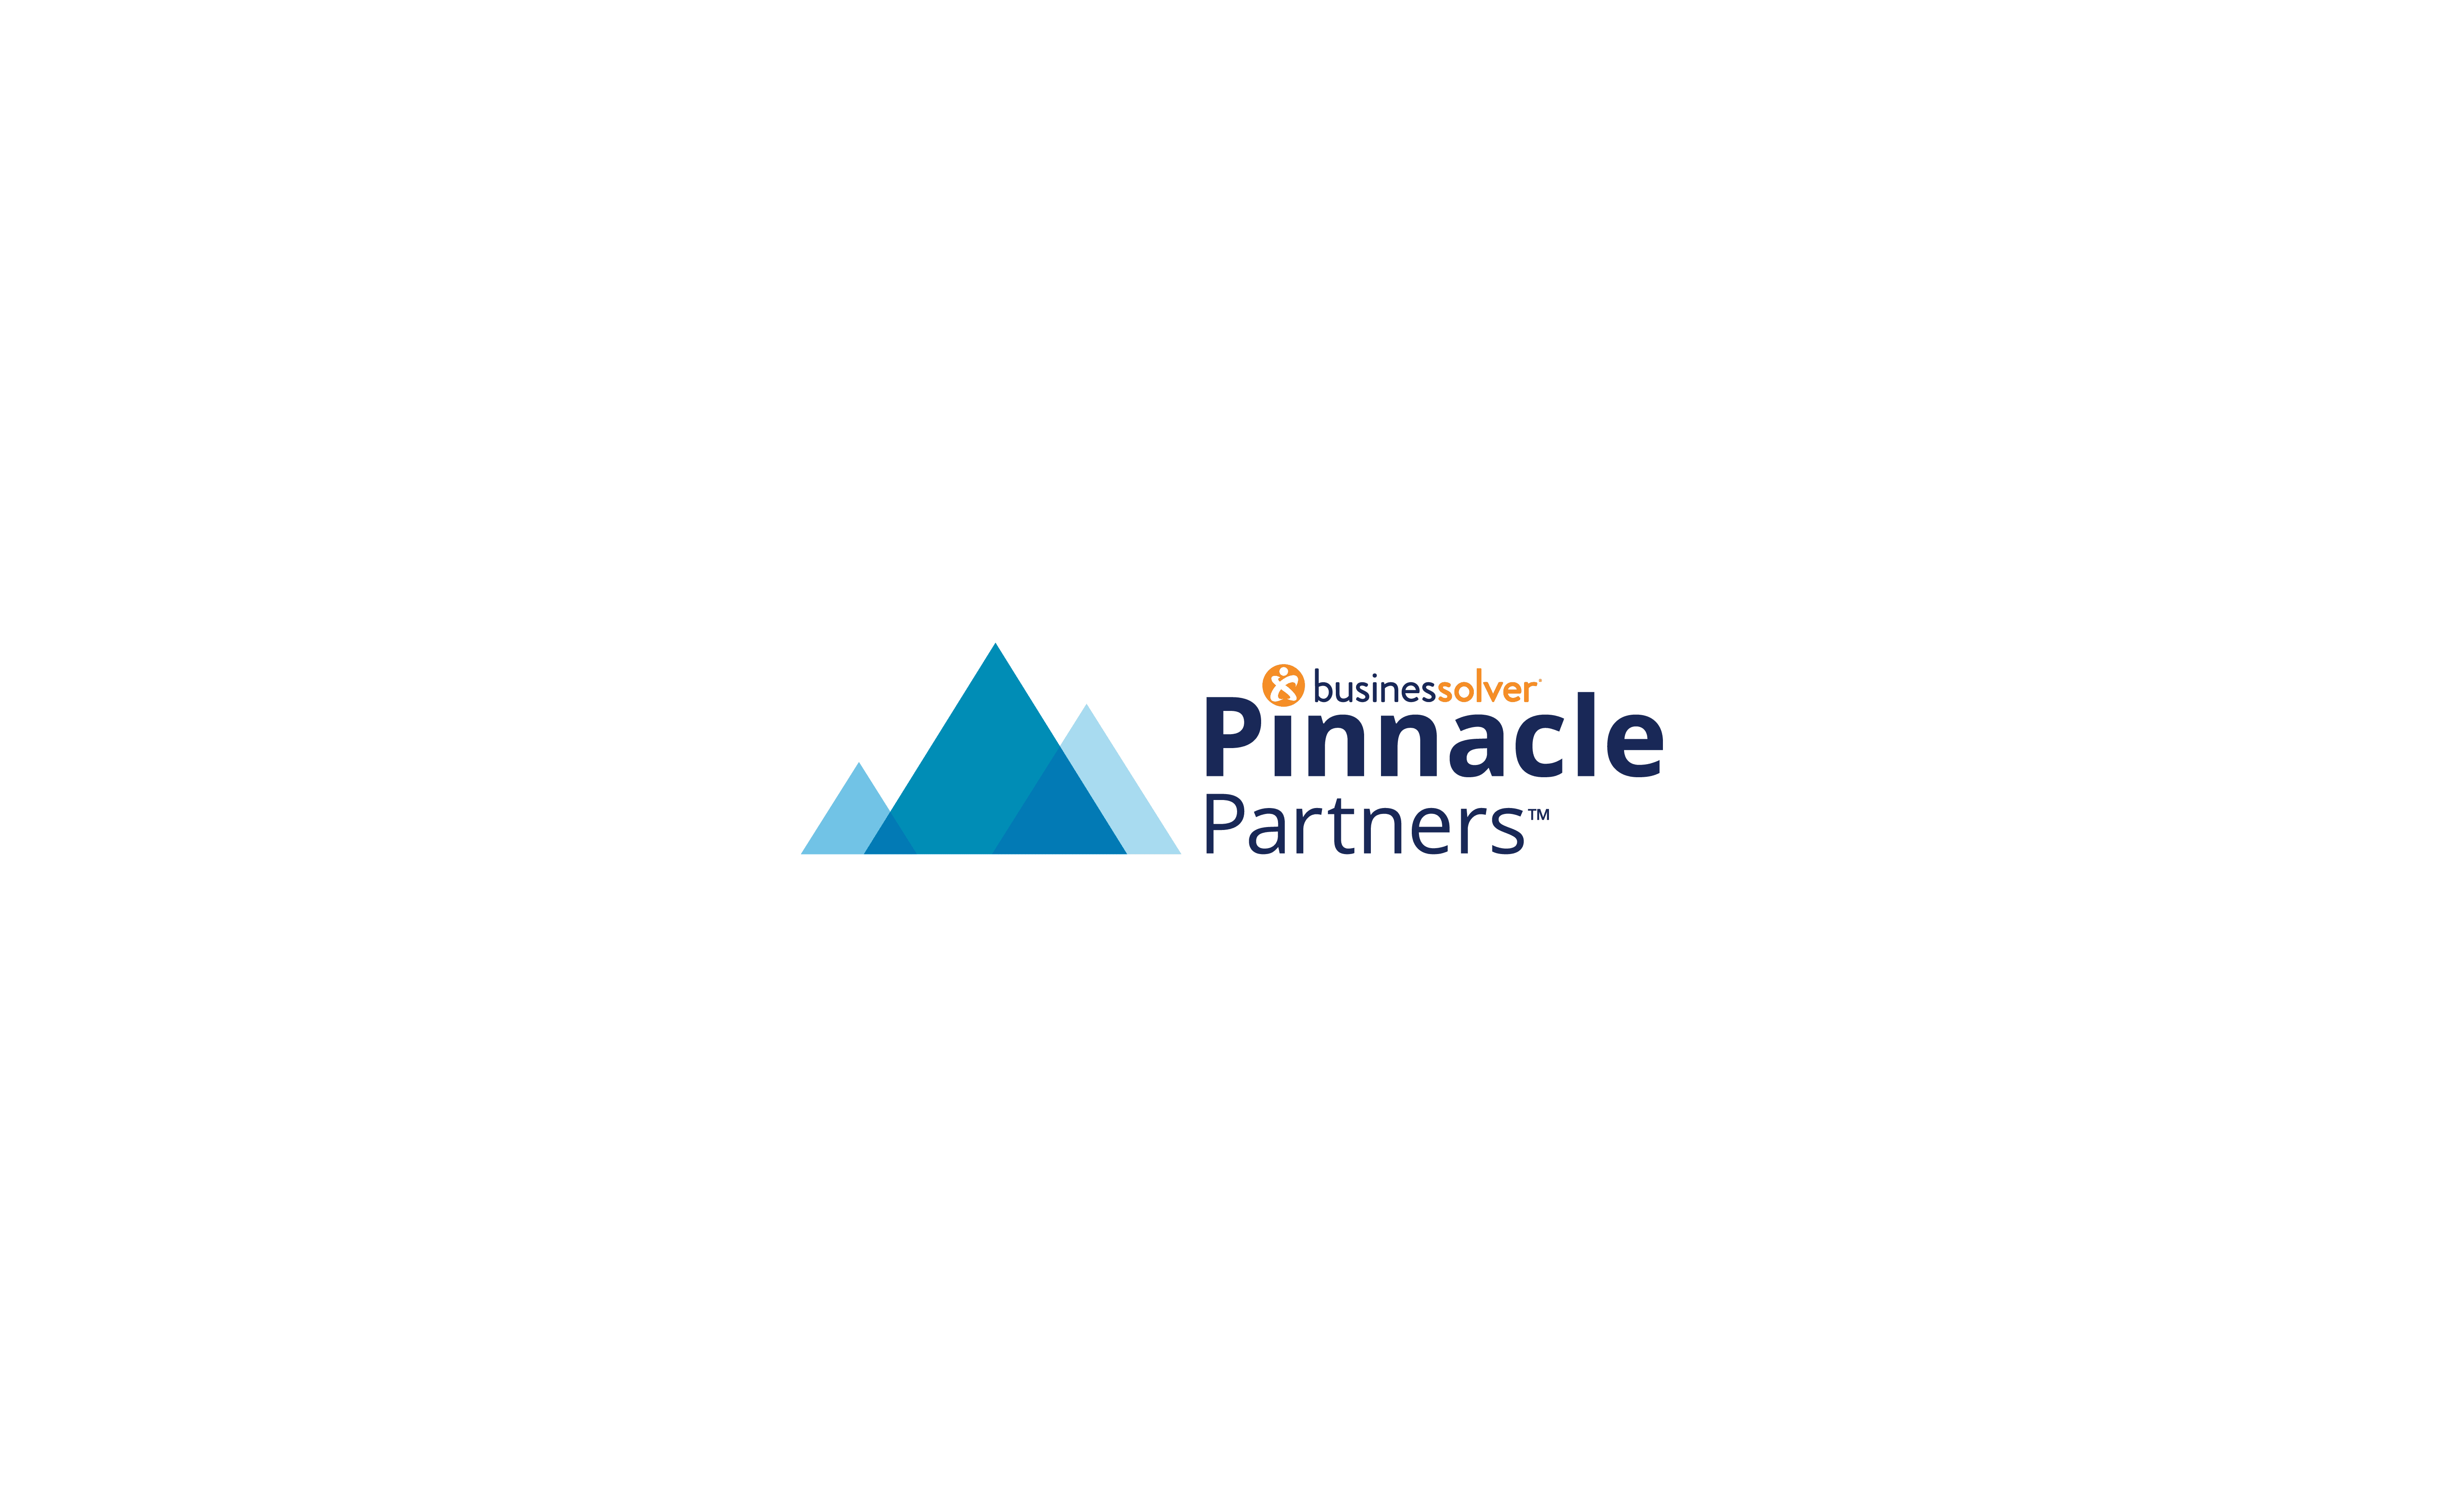 Pinnacle Partners logo with 3 blue mountain shaped triangles